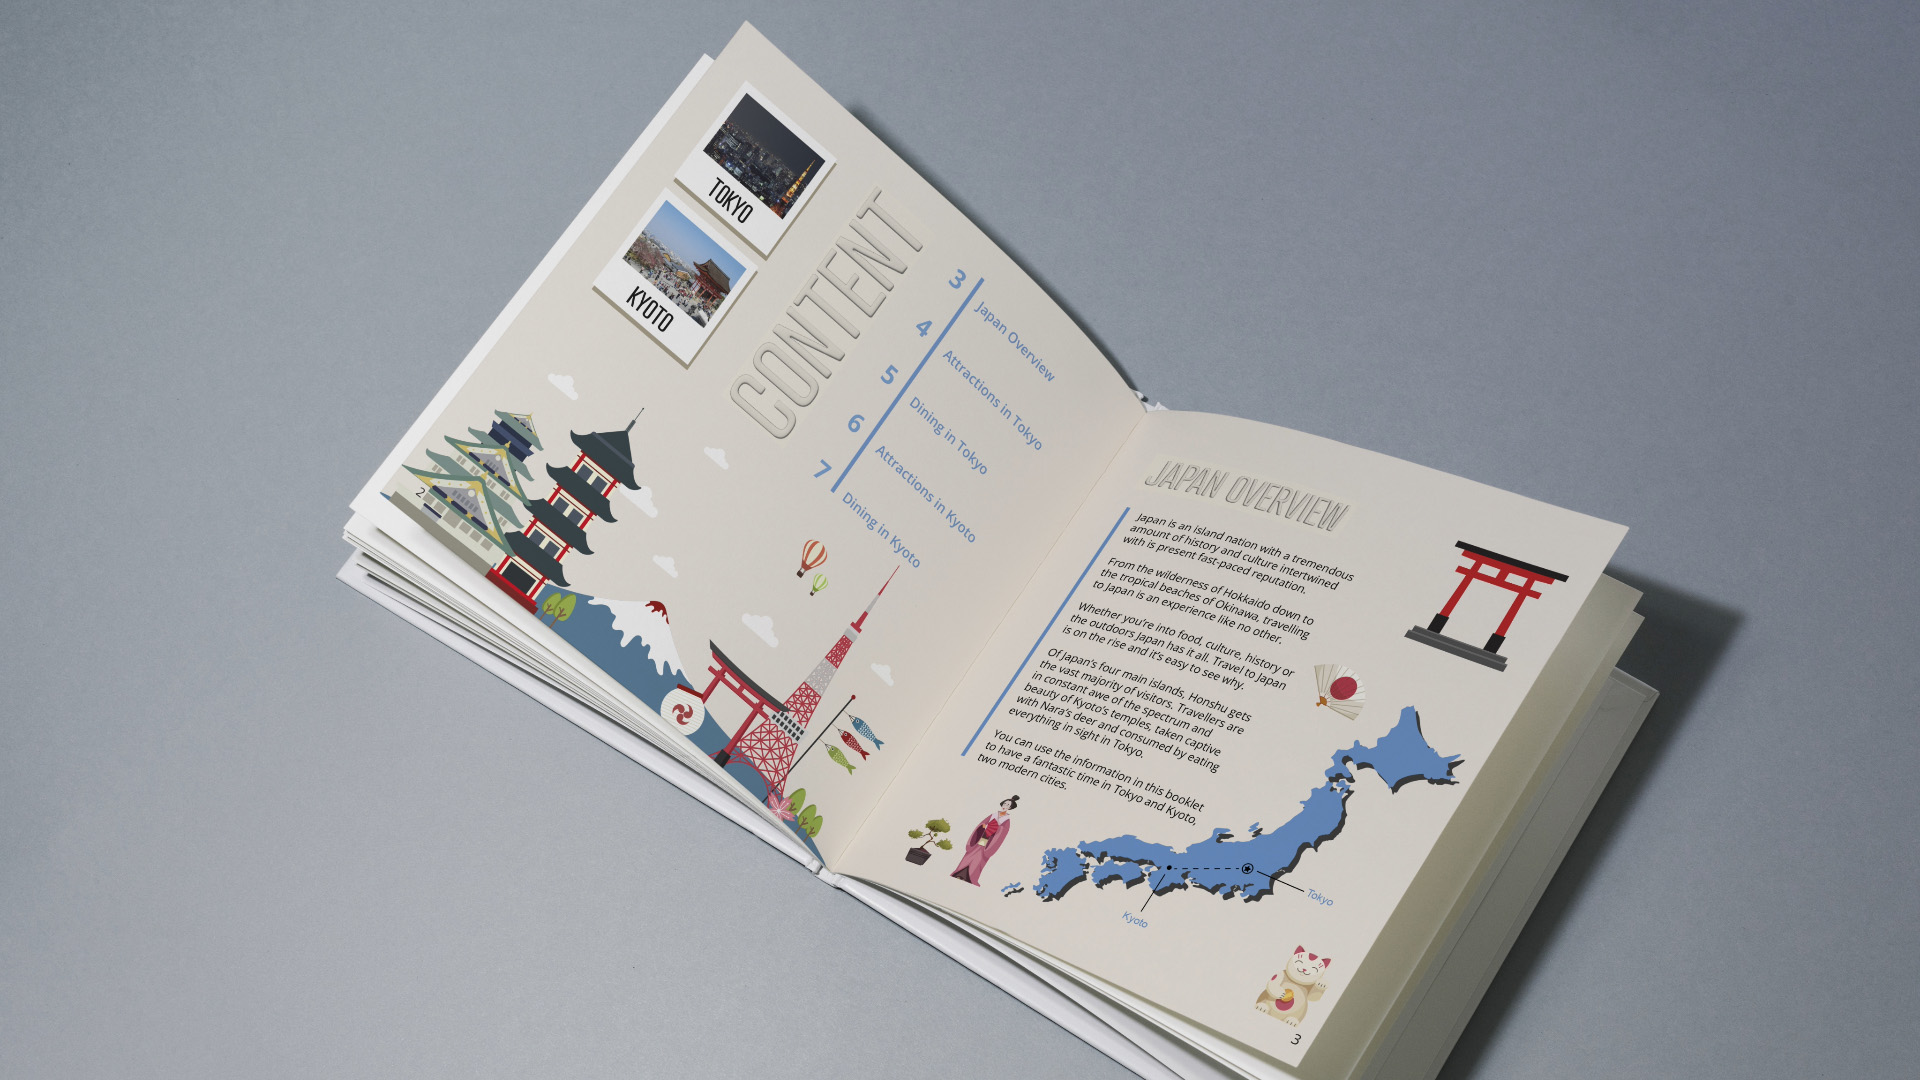 "Japan Mini Travel Guide," booklet / "Japan Mini Travel Guide," booklet, 8 x 8 inches booklet print, 2022. This booklet introduce visitor to Japan to some highlight that Japan has to offer when they visit.